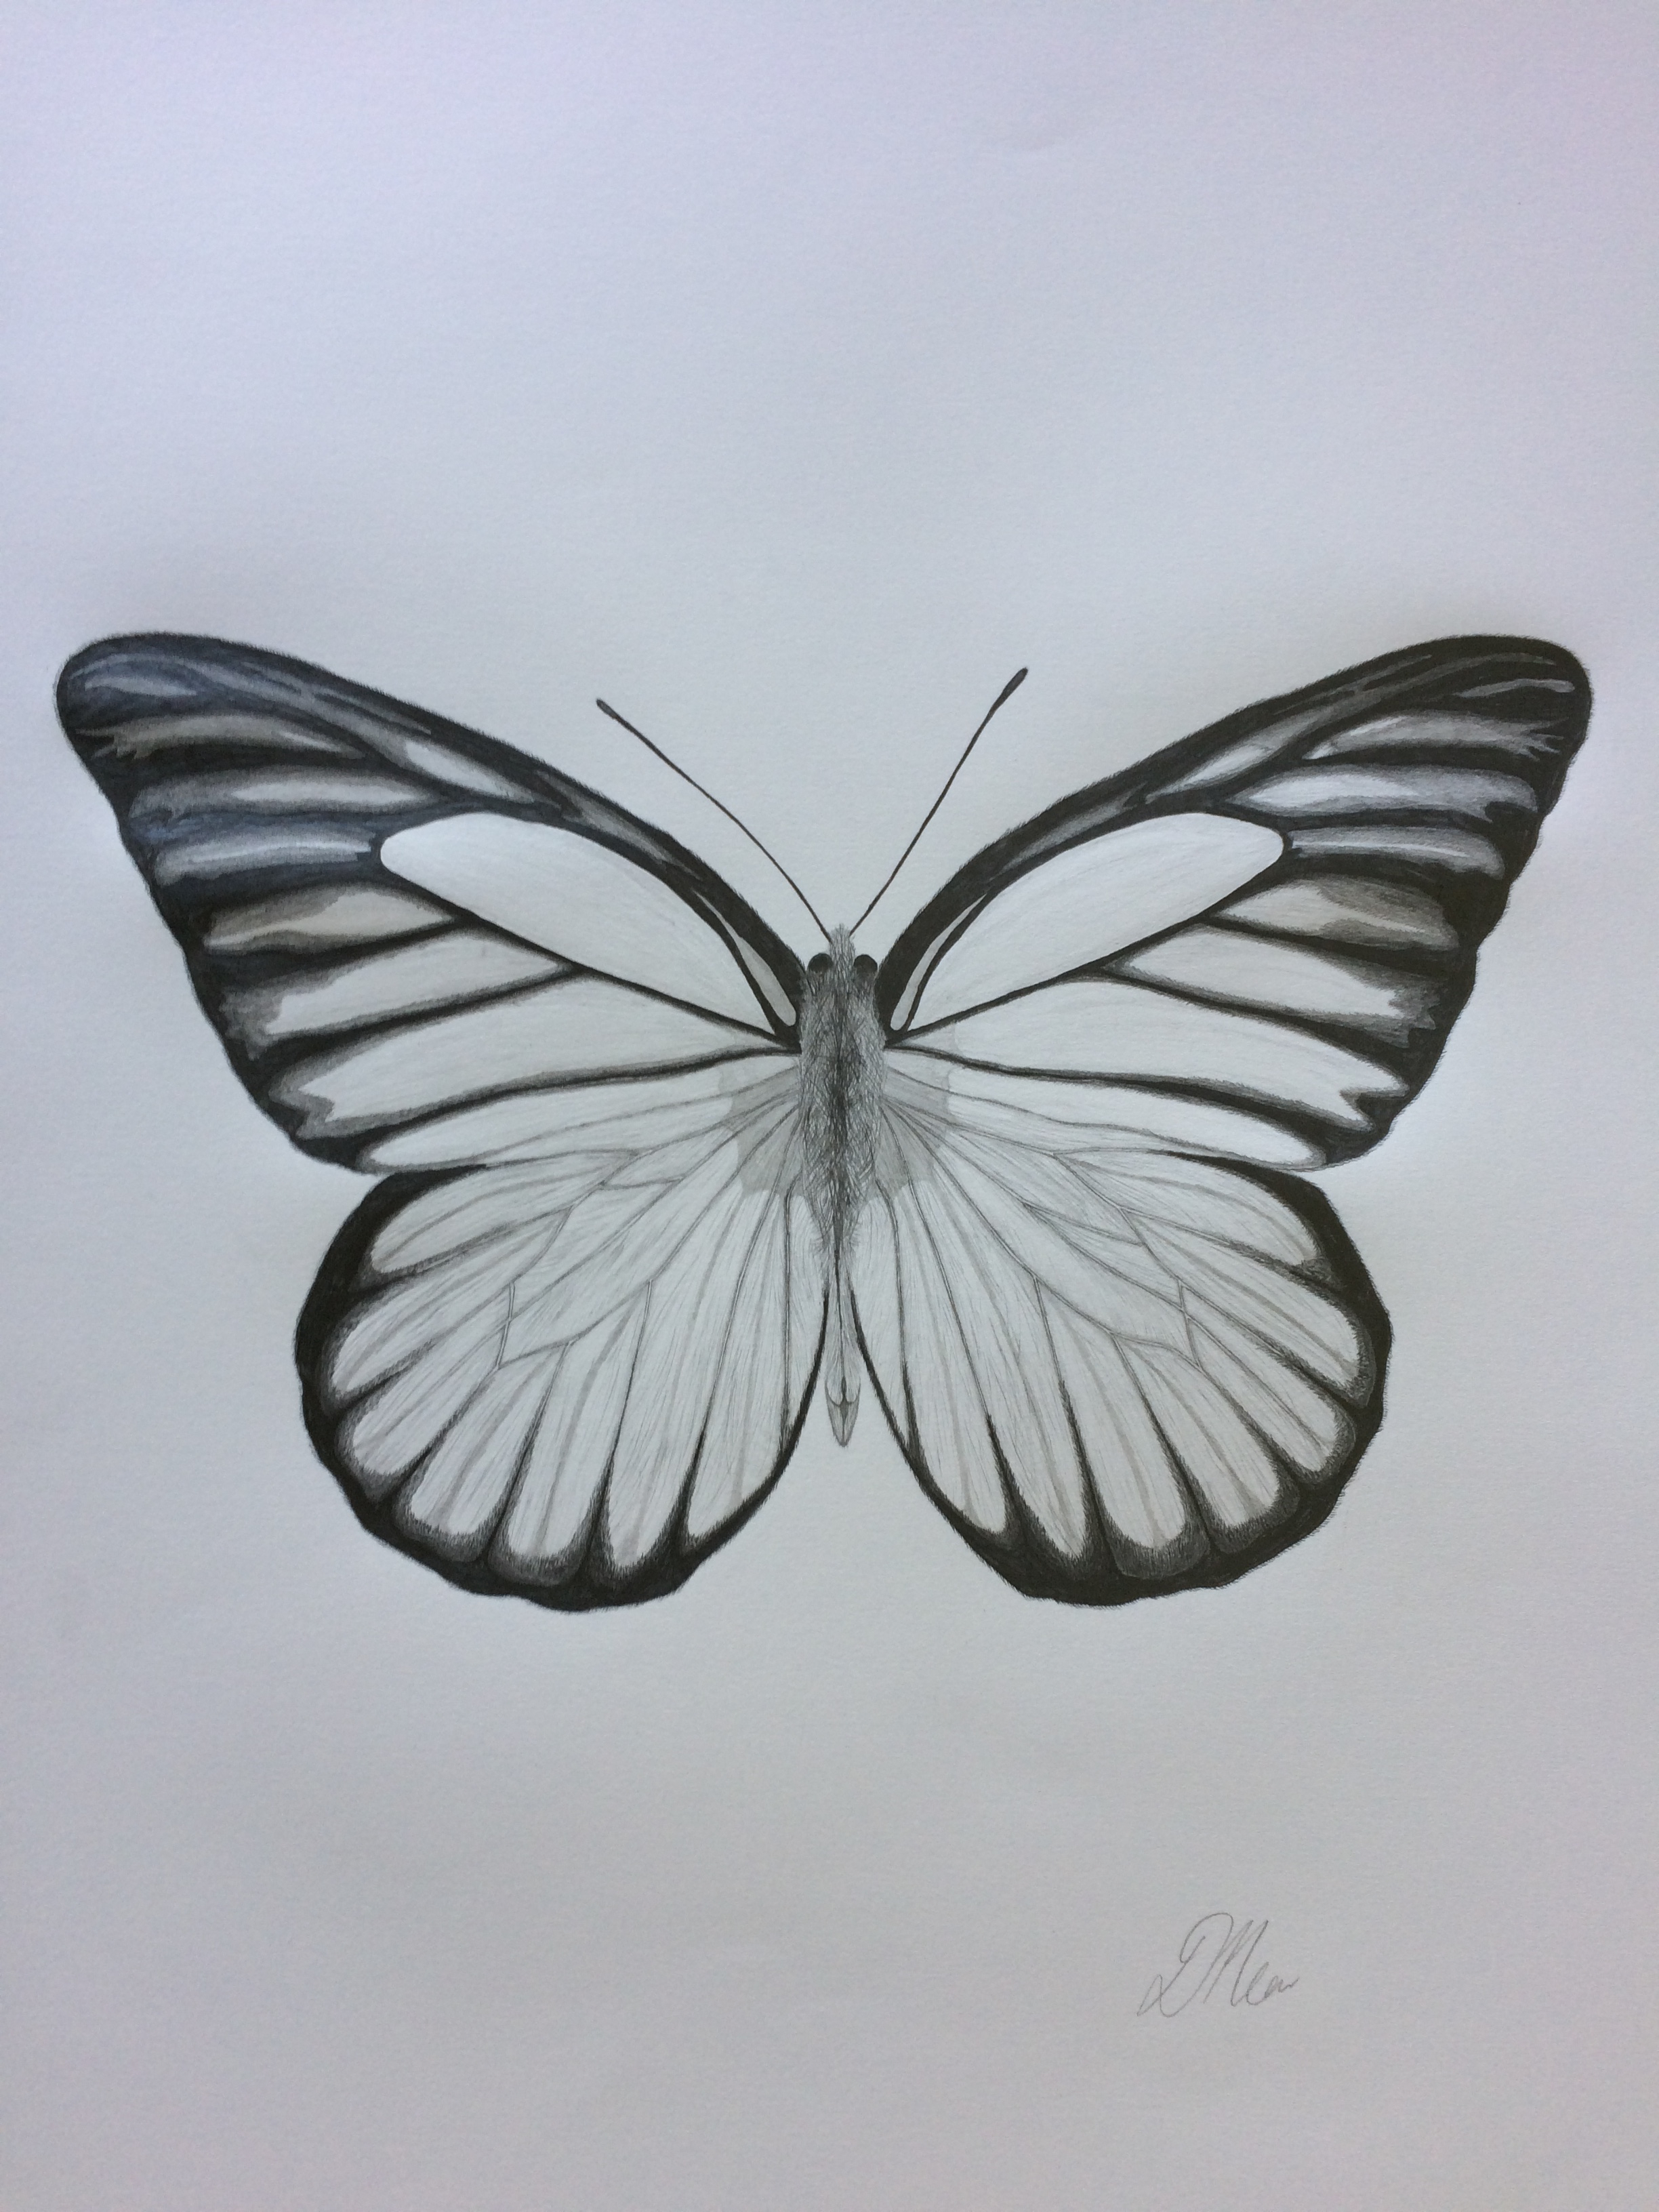 Butterfly Sketch Drawings at PaintingValley.com | Explore collection of ...